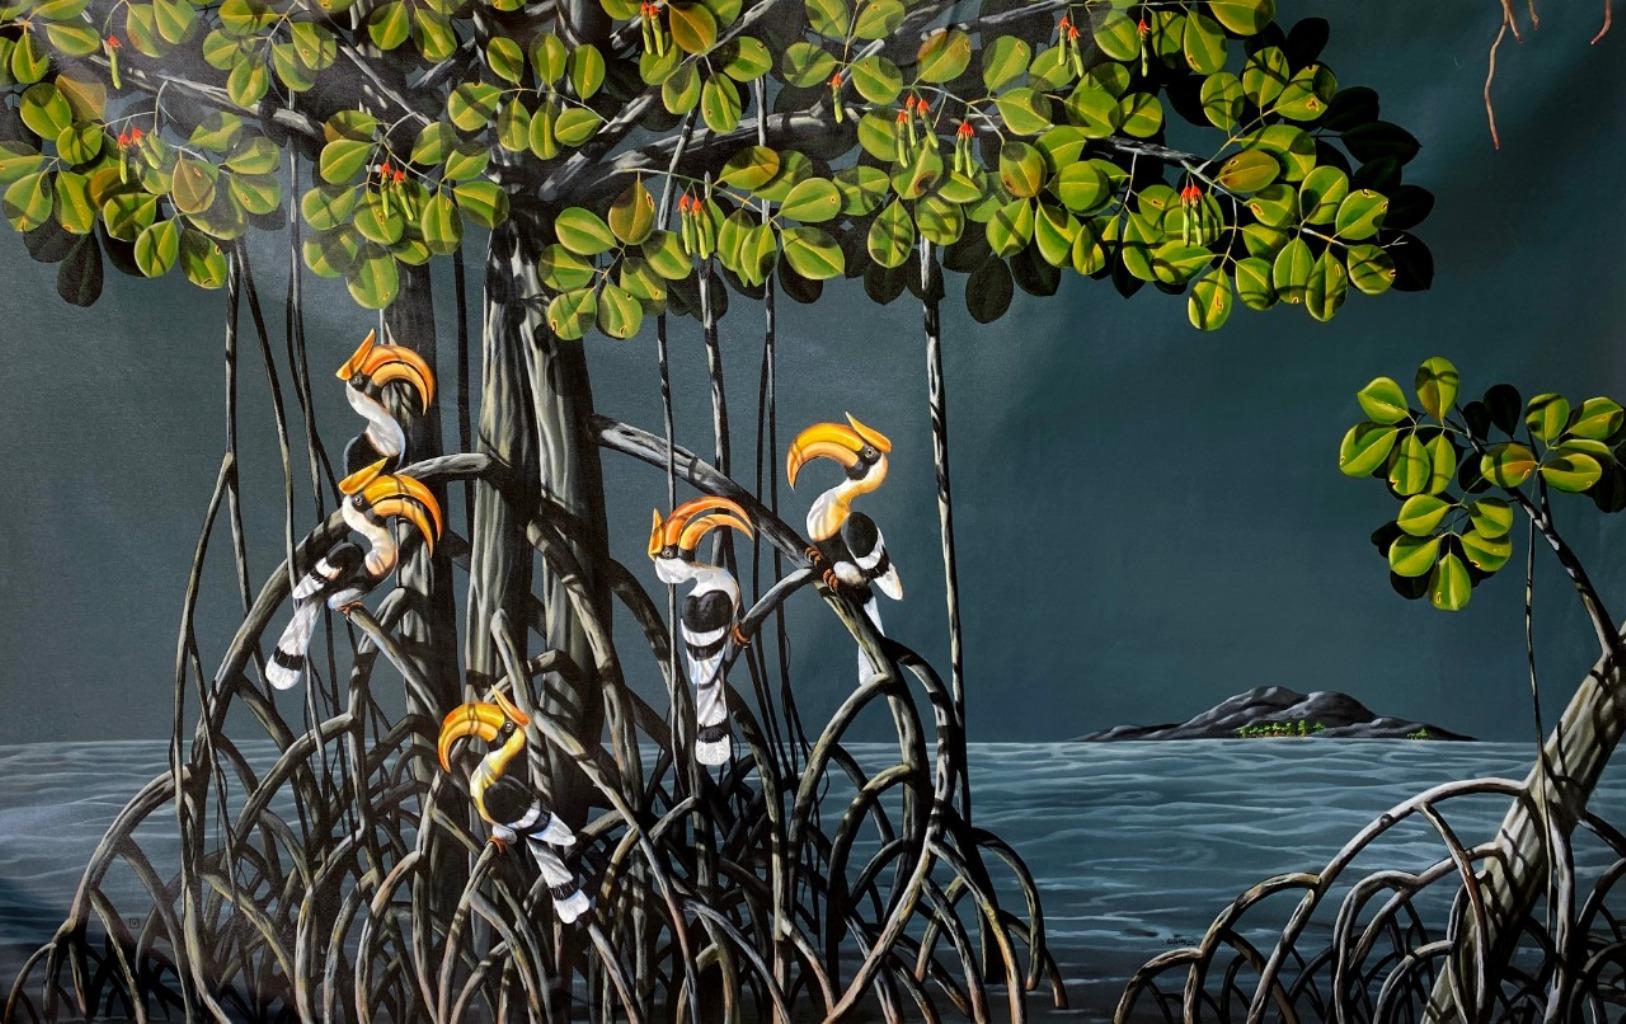 Blooming Spring Mangroves, Acrylic on Canvas by Contemporary Artist "In Stock"